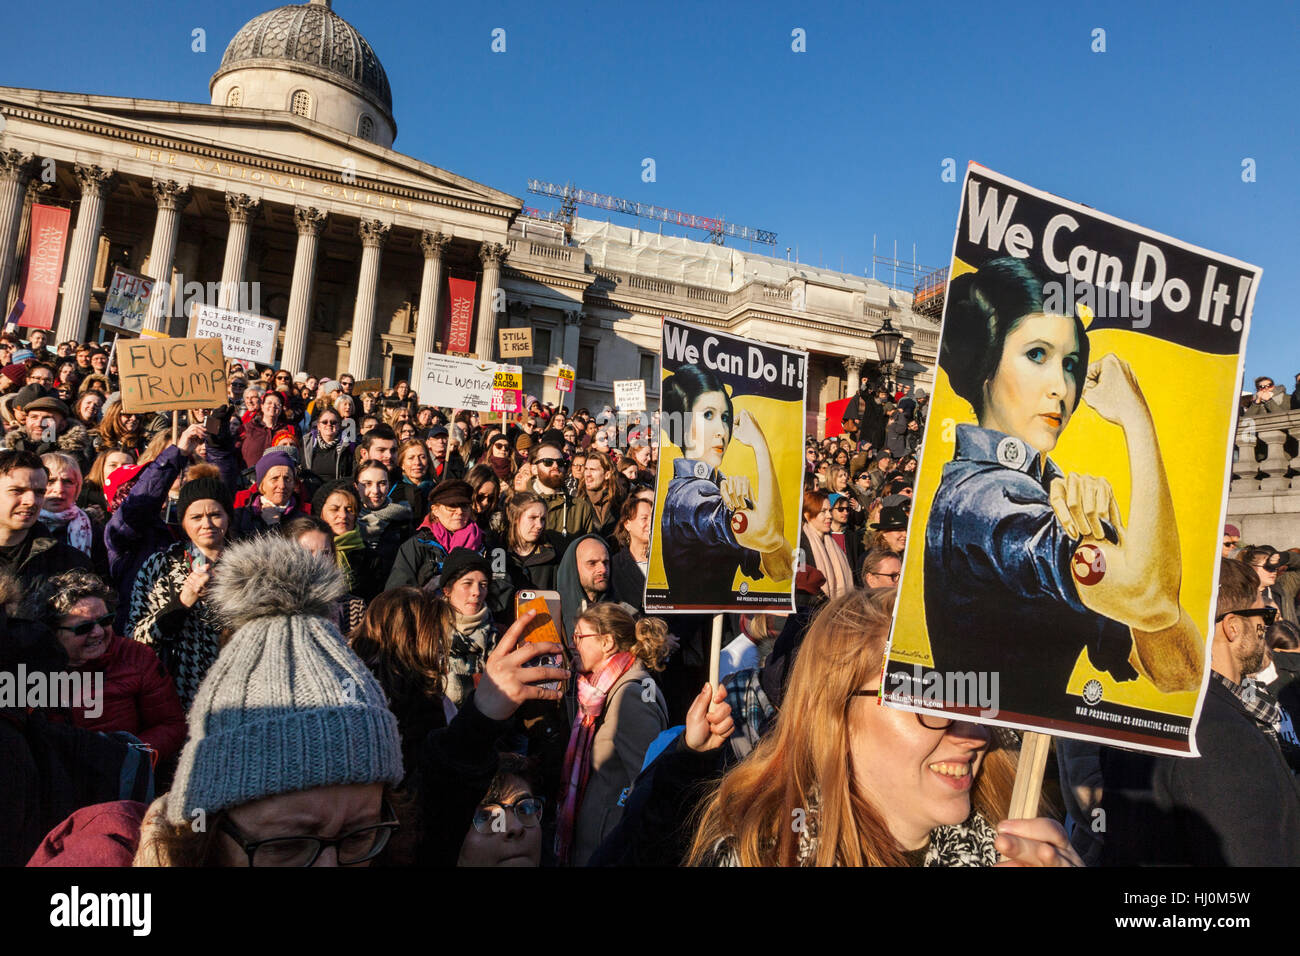 London, United Kingdom, 21st January 2017: Following Donald Trump's inauguration on 20th January, 100,000 protesters have marched in London to express their opposition to his controversial presidency. Demonstrators walked from the American Embassy in Grosvenor Square, to Trafalgar Square, and the Women's March on London was one of hundreds of protests taking place in major cities around the world on Saturday. Credit: galit seligmann/Alamy Live News Stock Photo